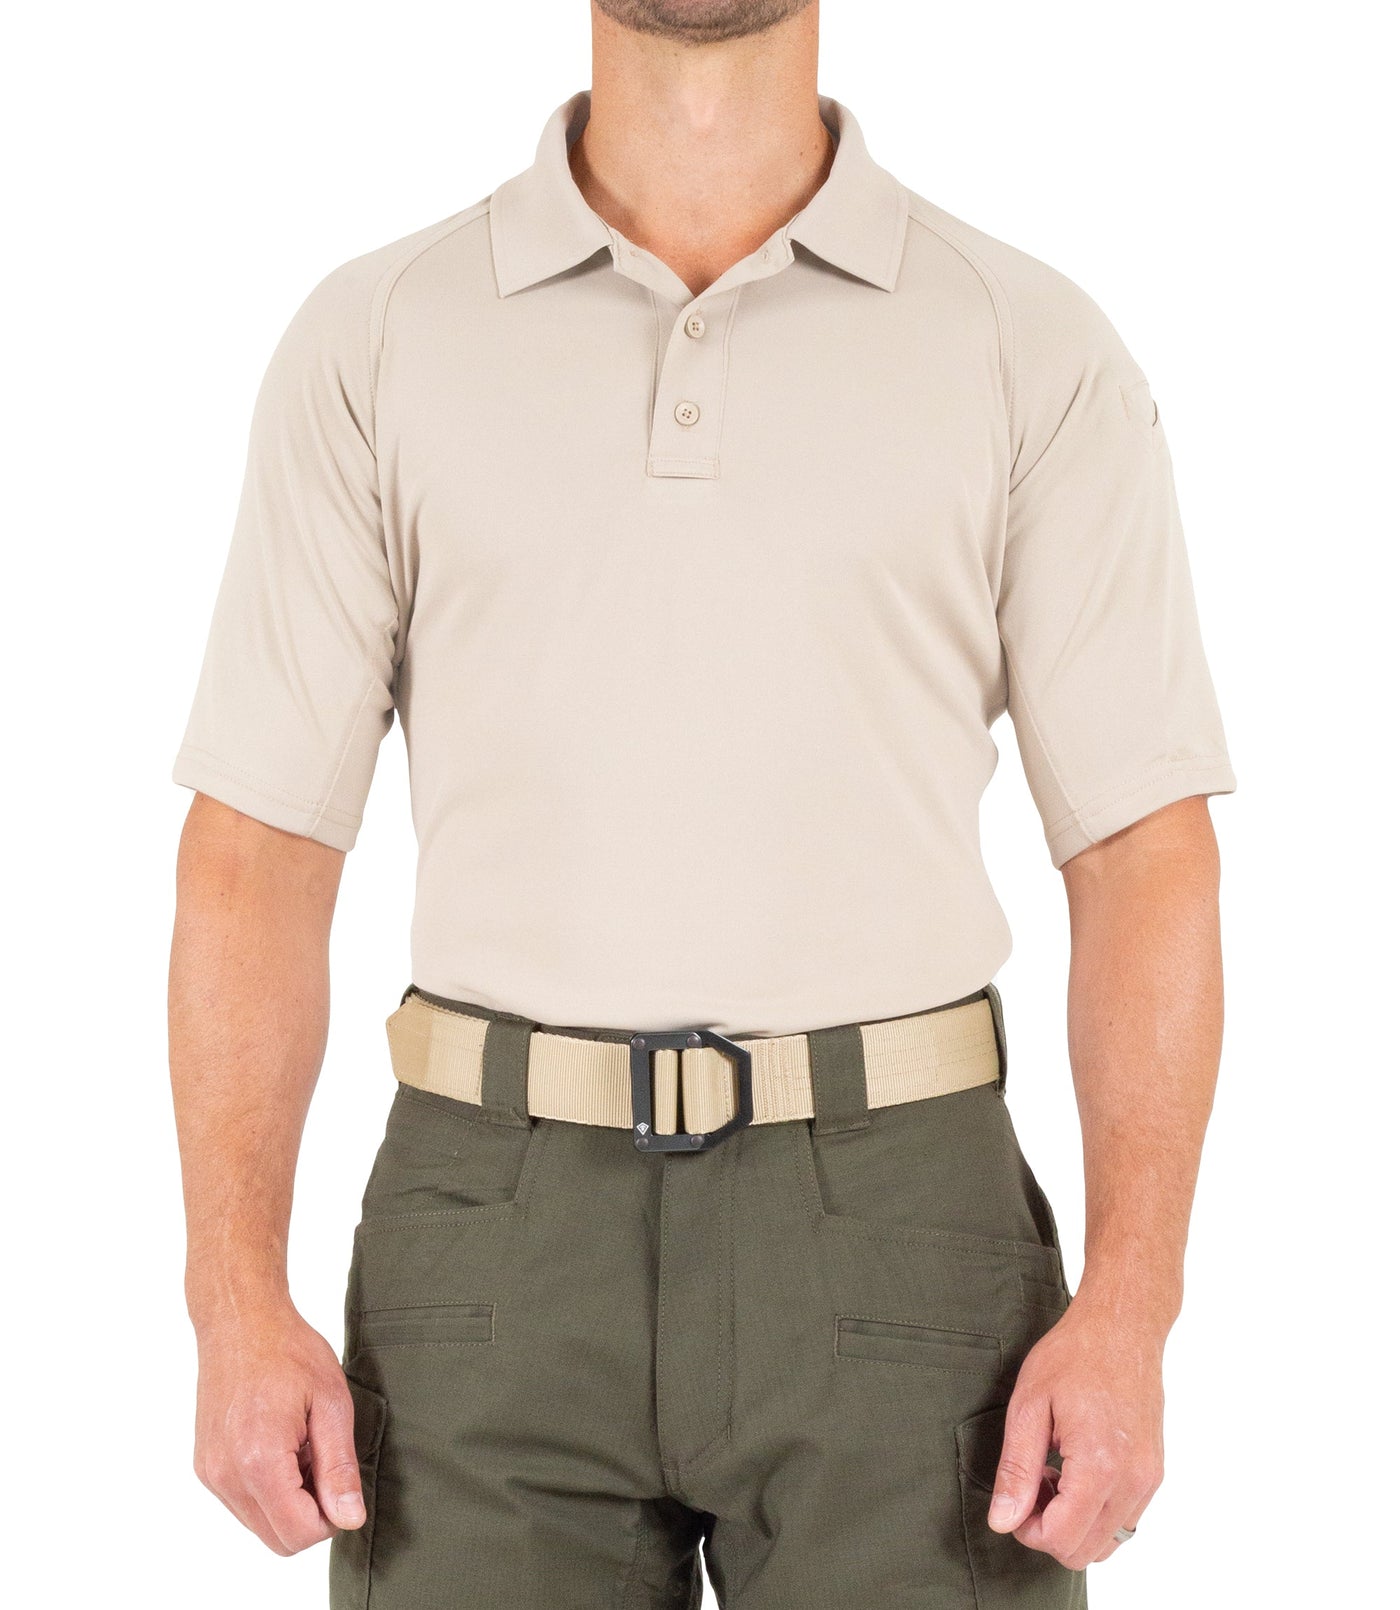 Front of Men's Performance Short Sleeve Polo in Khaki